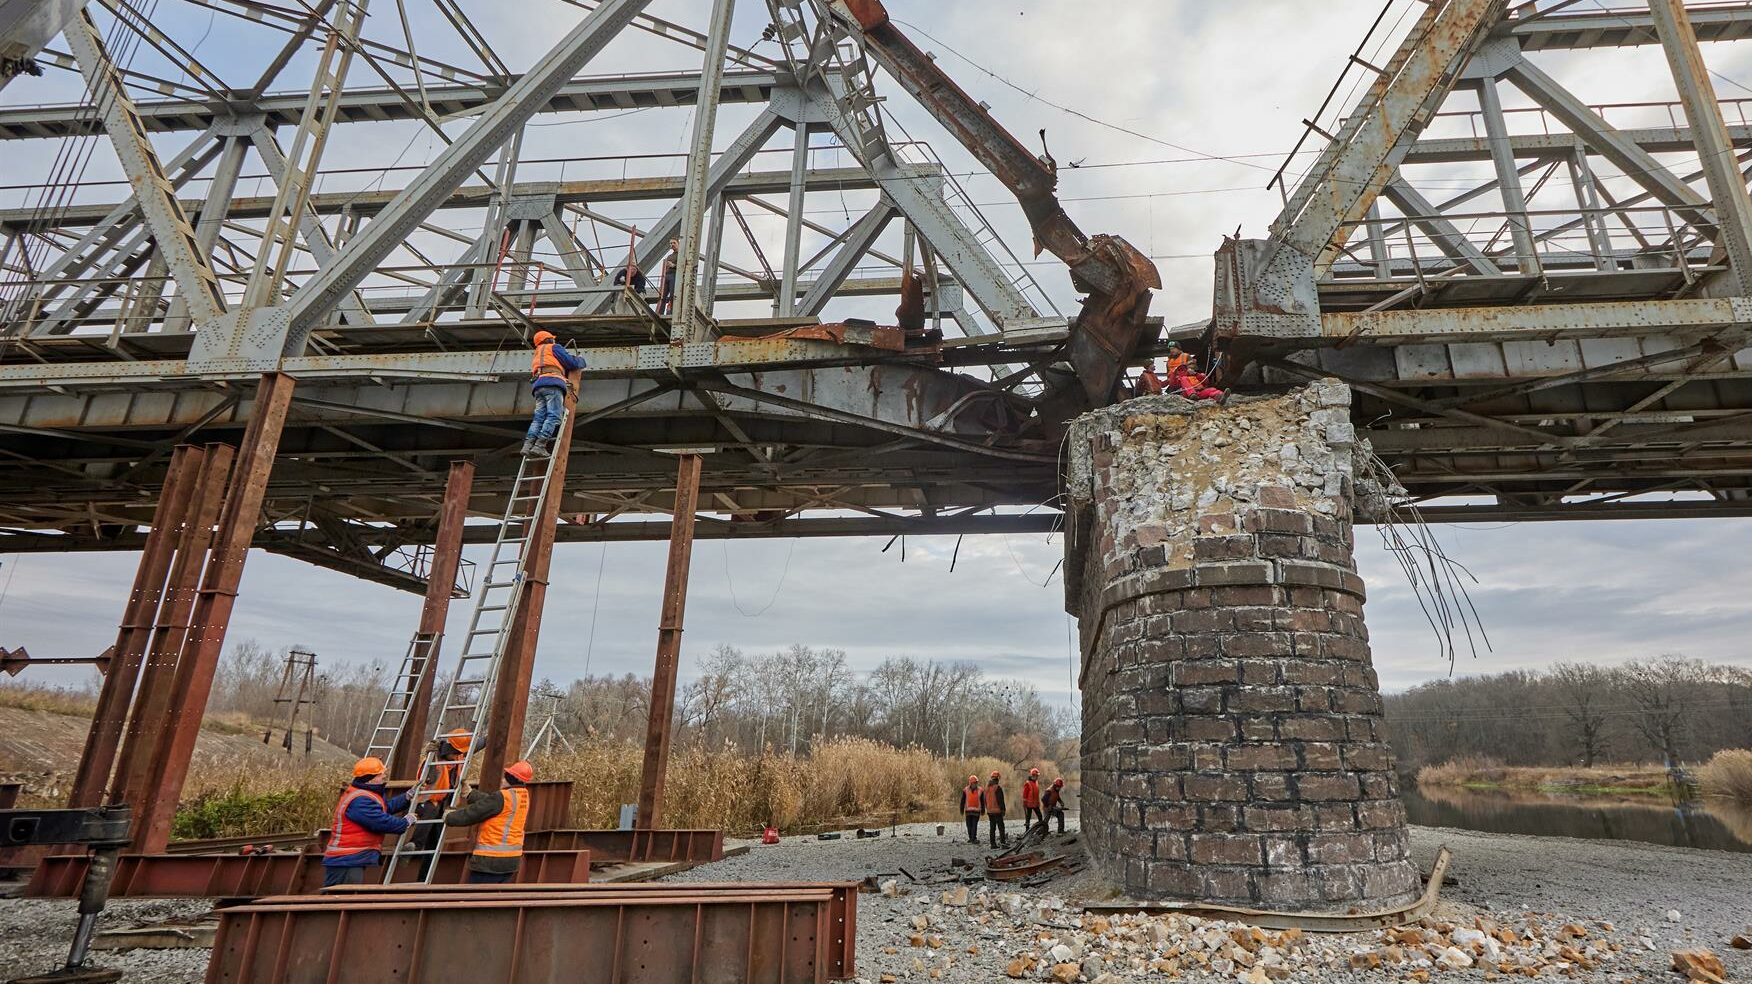 Workers repair a railway bridge after it was damaged in fighting between the Ukrainian and Russian armies in the town of Kupiansk